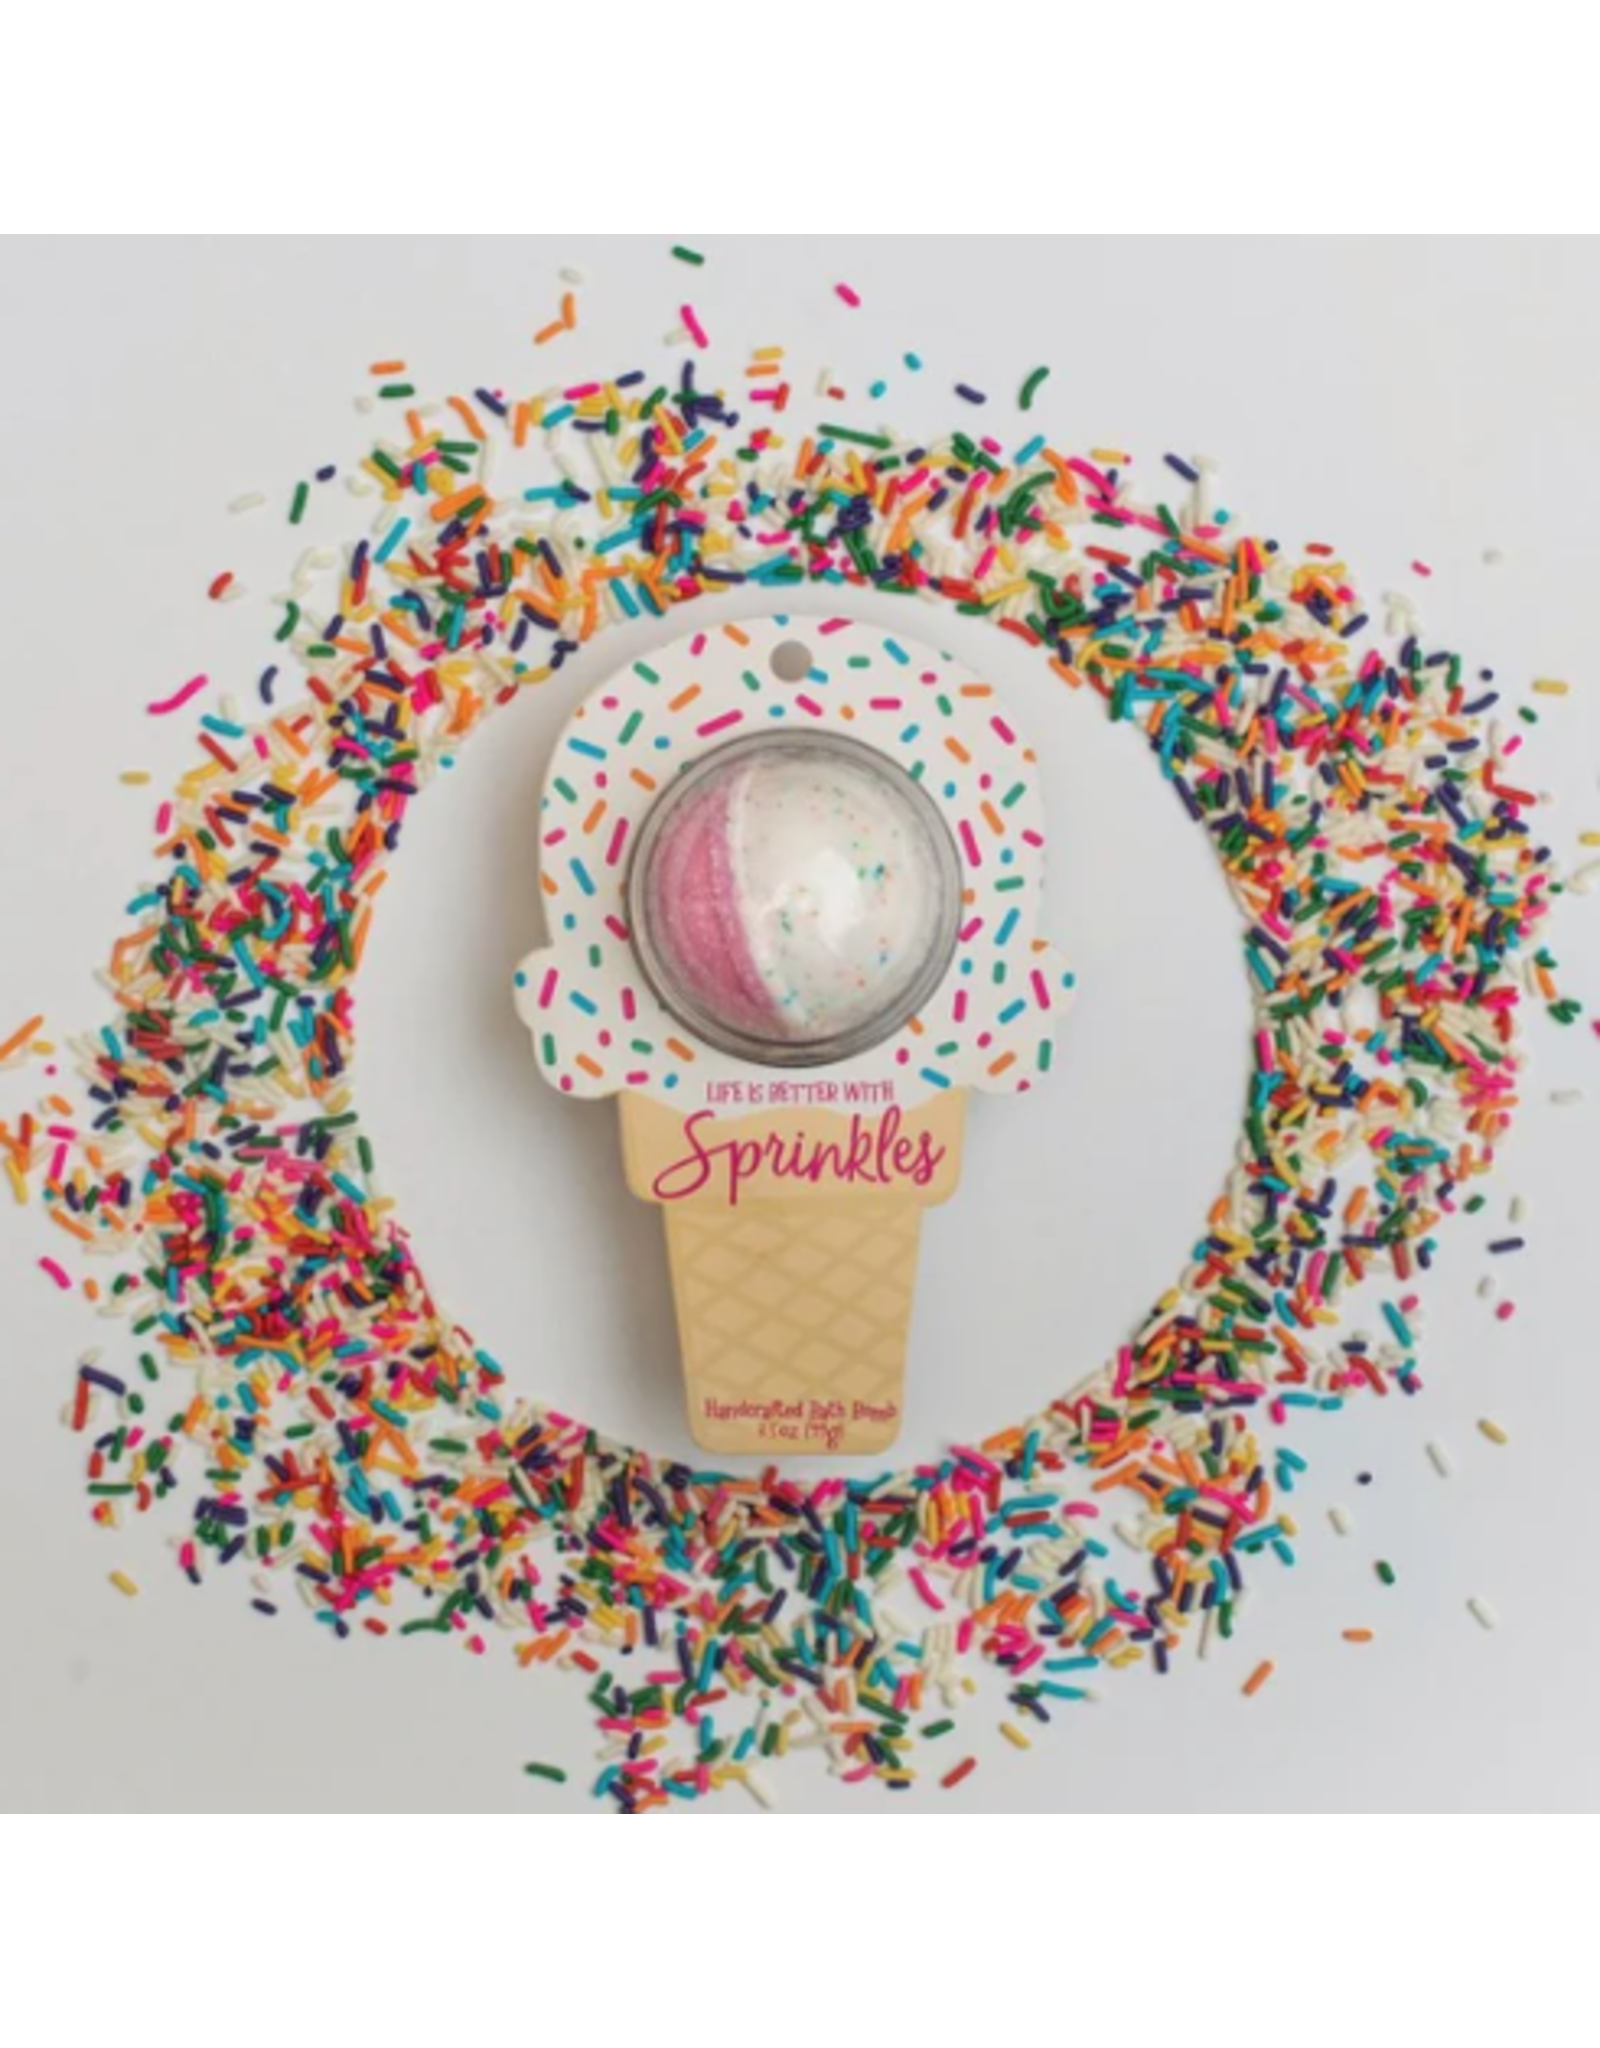 Cait & Co Bath Bomb Life Is Better With Sprinkles